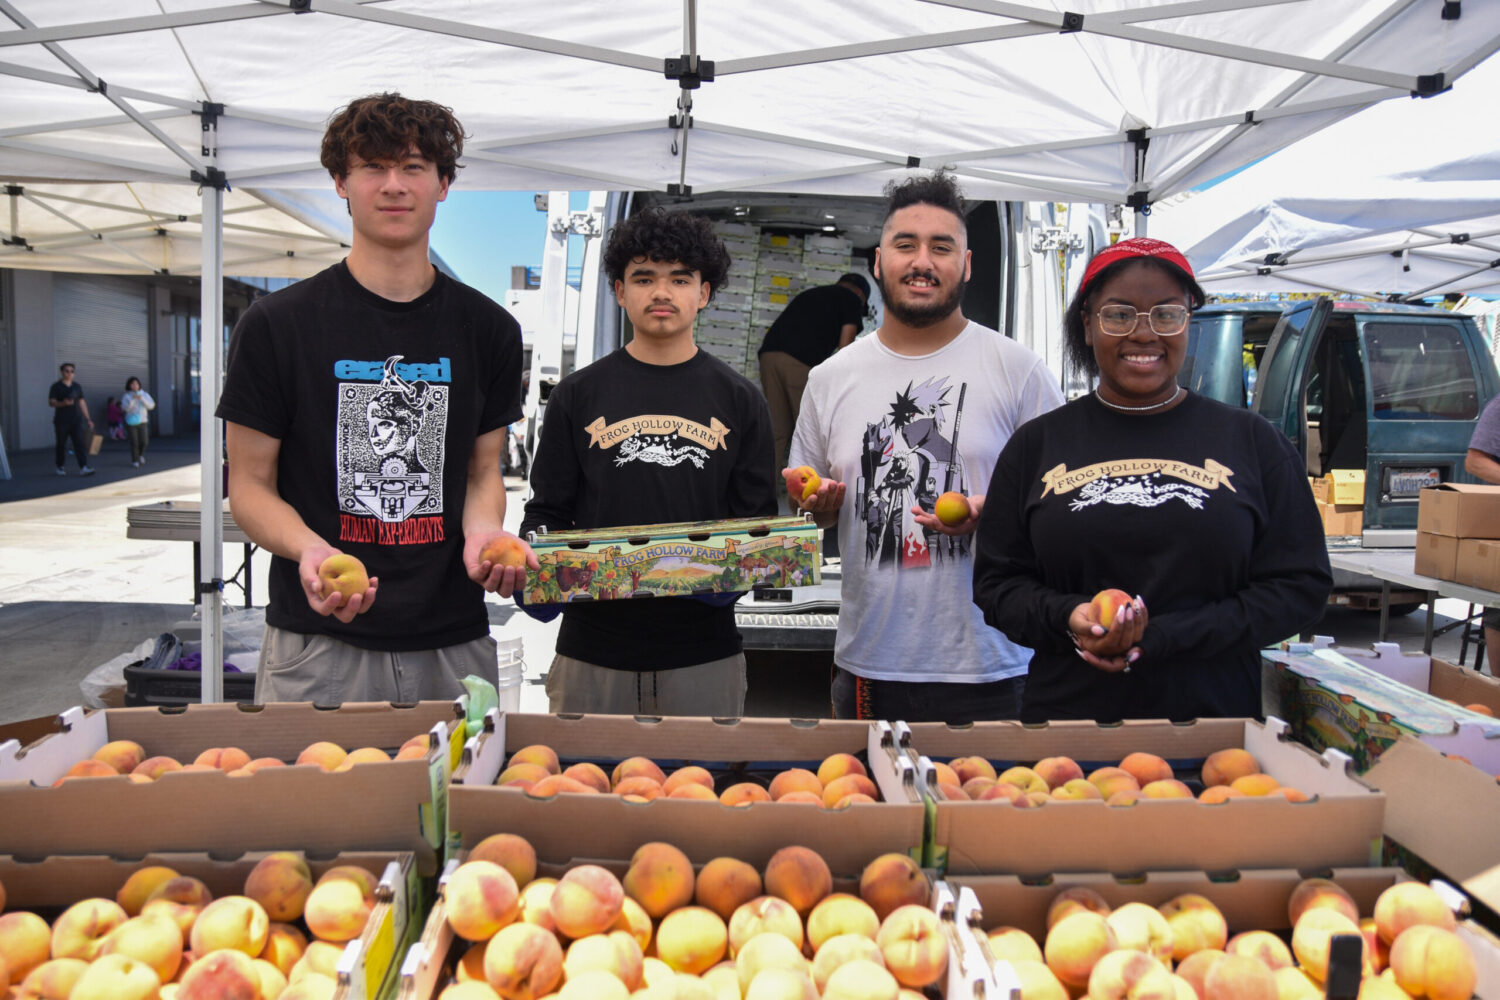 Foodwise Teens pose for a photo at Frog Hollow Farm's stand at the Ferry Plaza Farmers Market. Peaches and stone fruit are in the foreground.